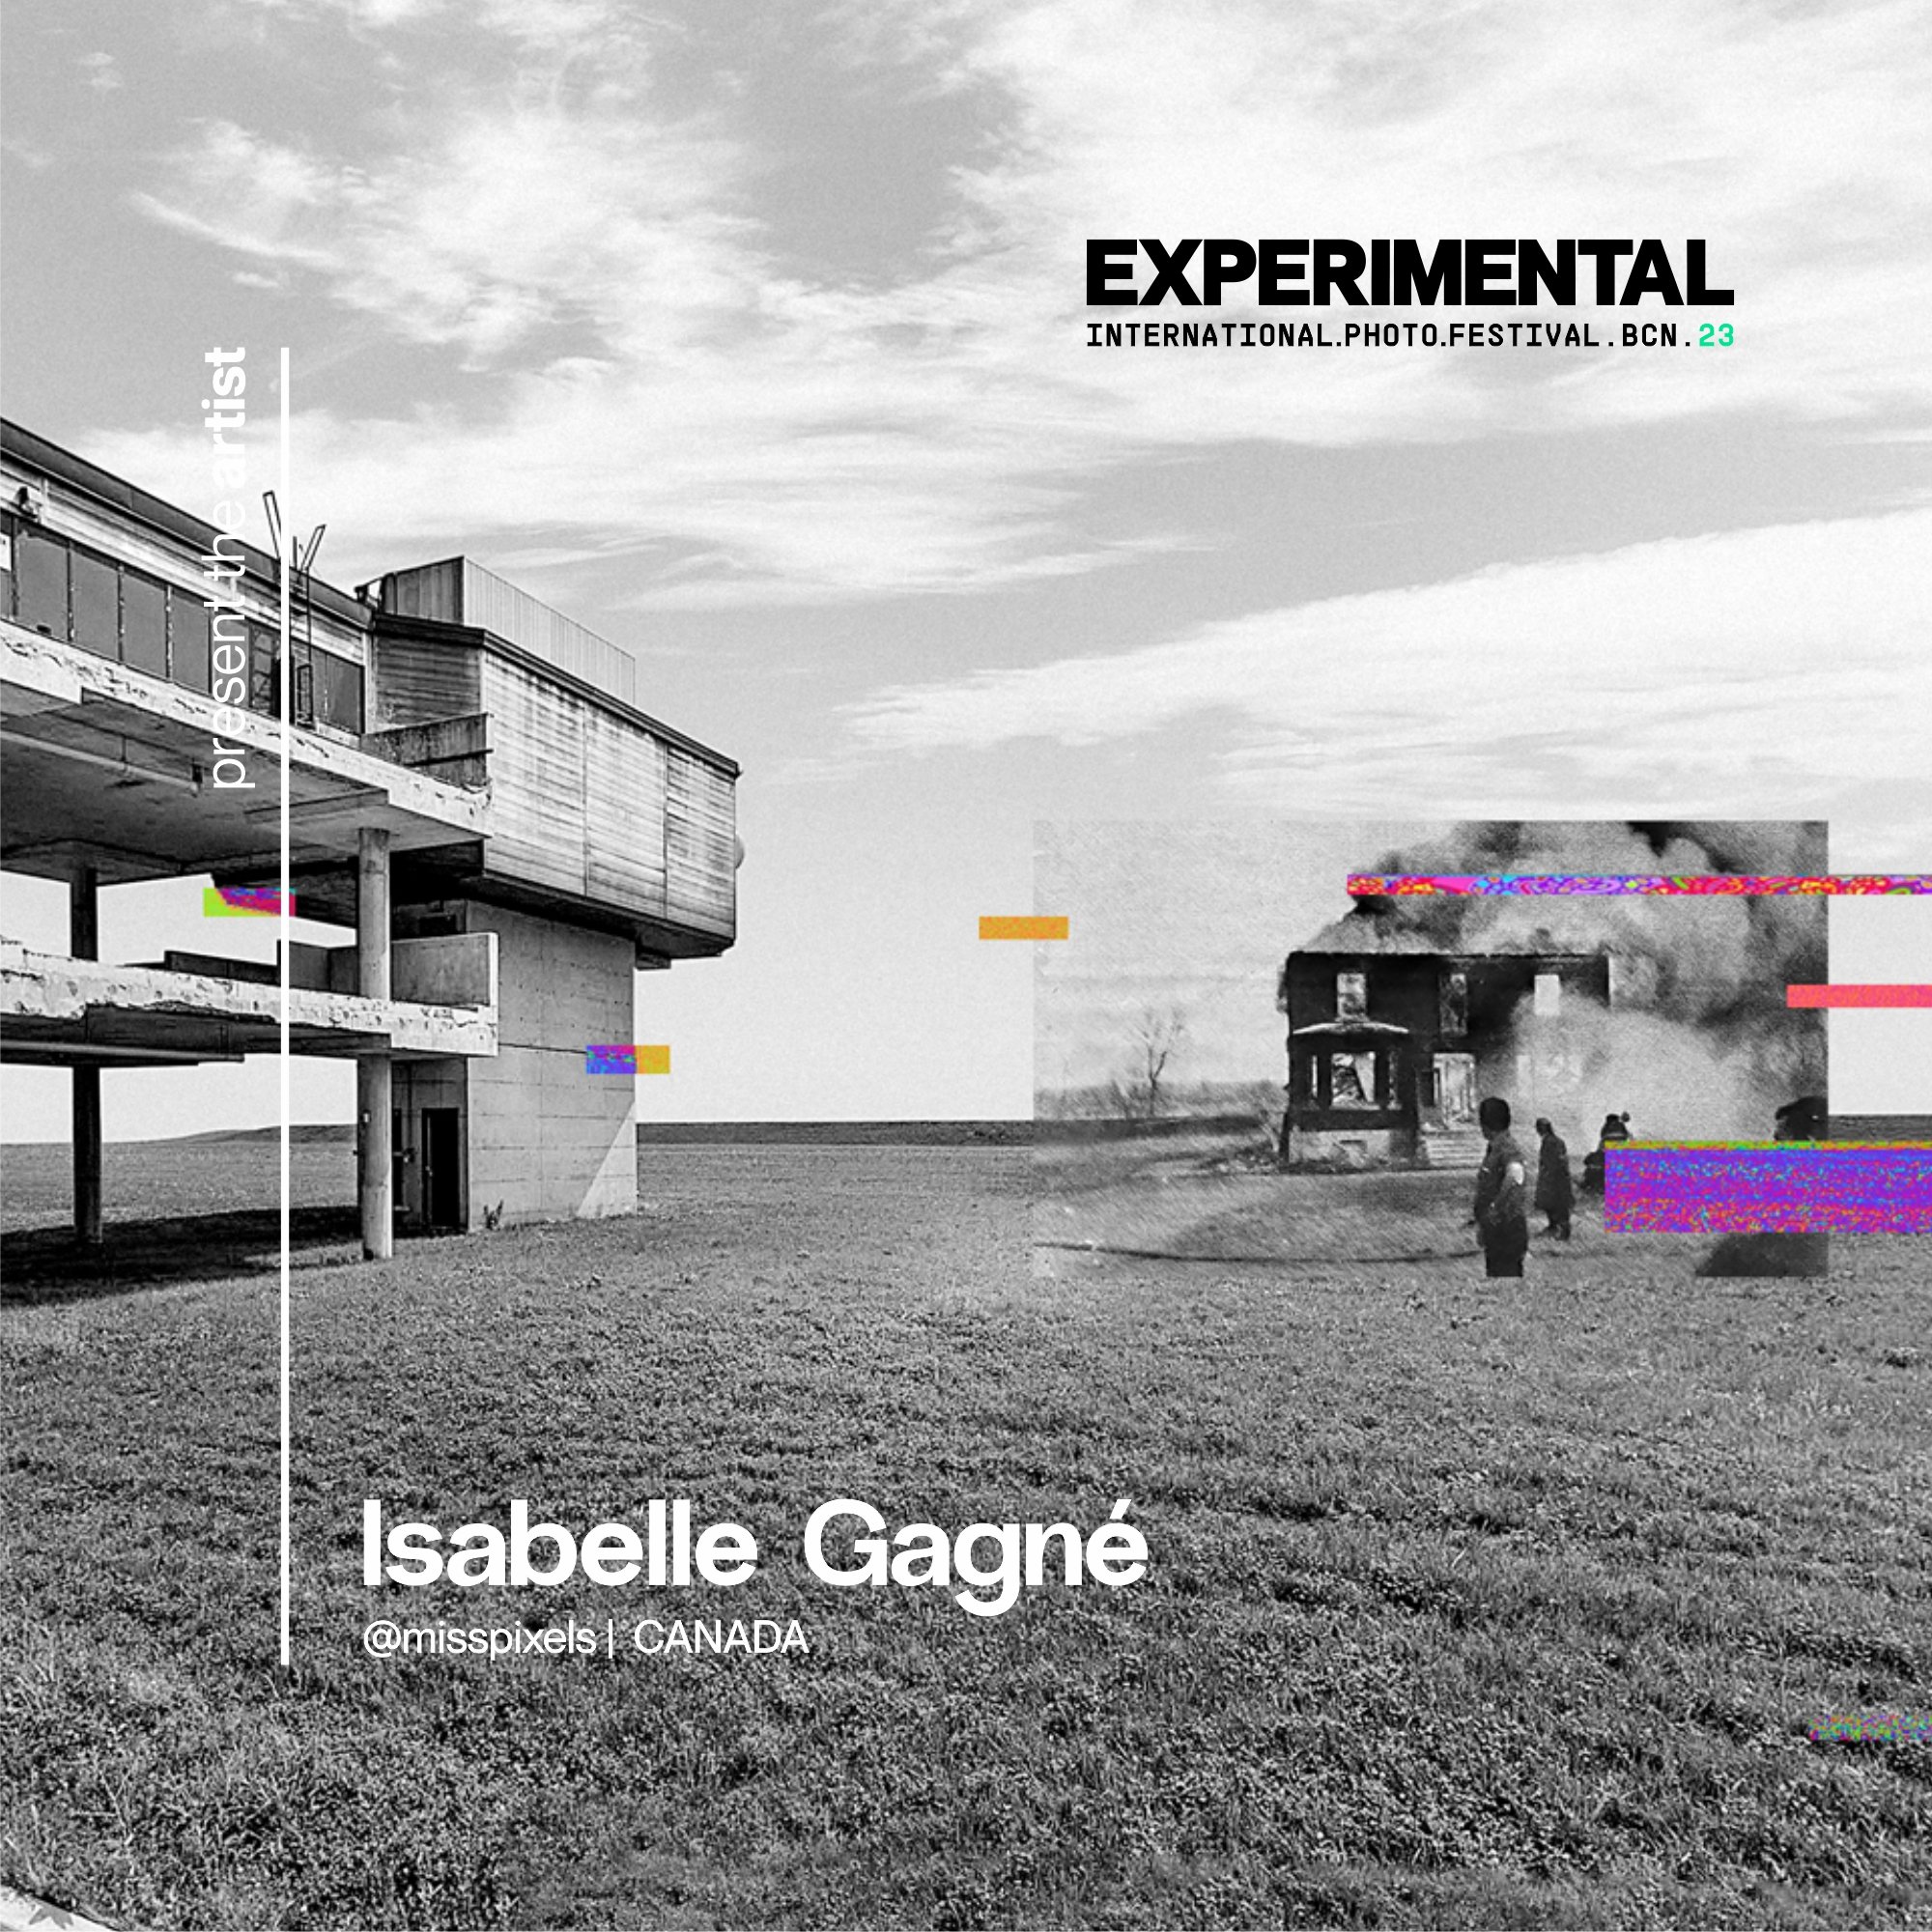 A003_Isabelle Gagné_FEED.jpg